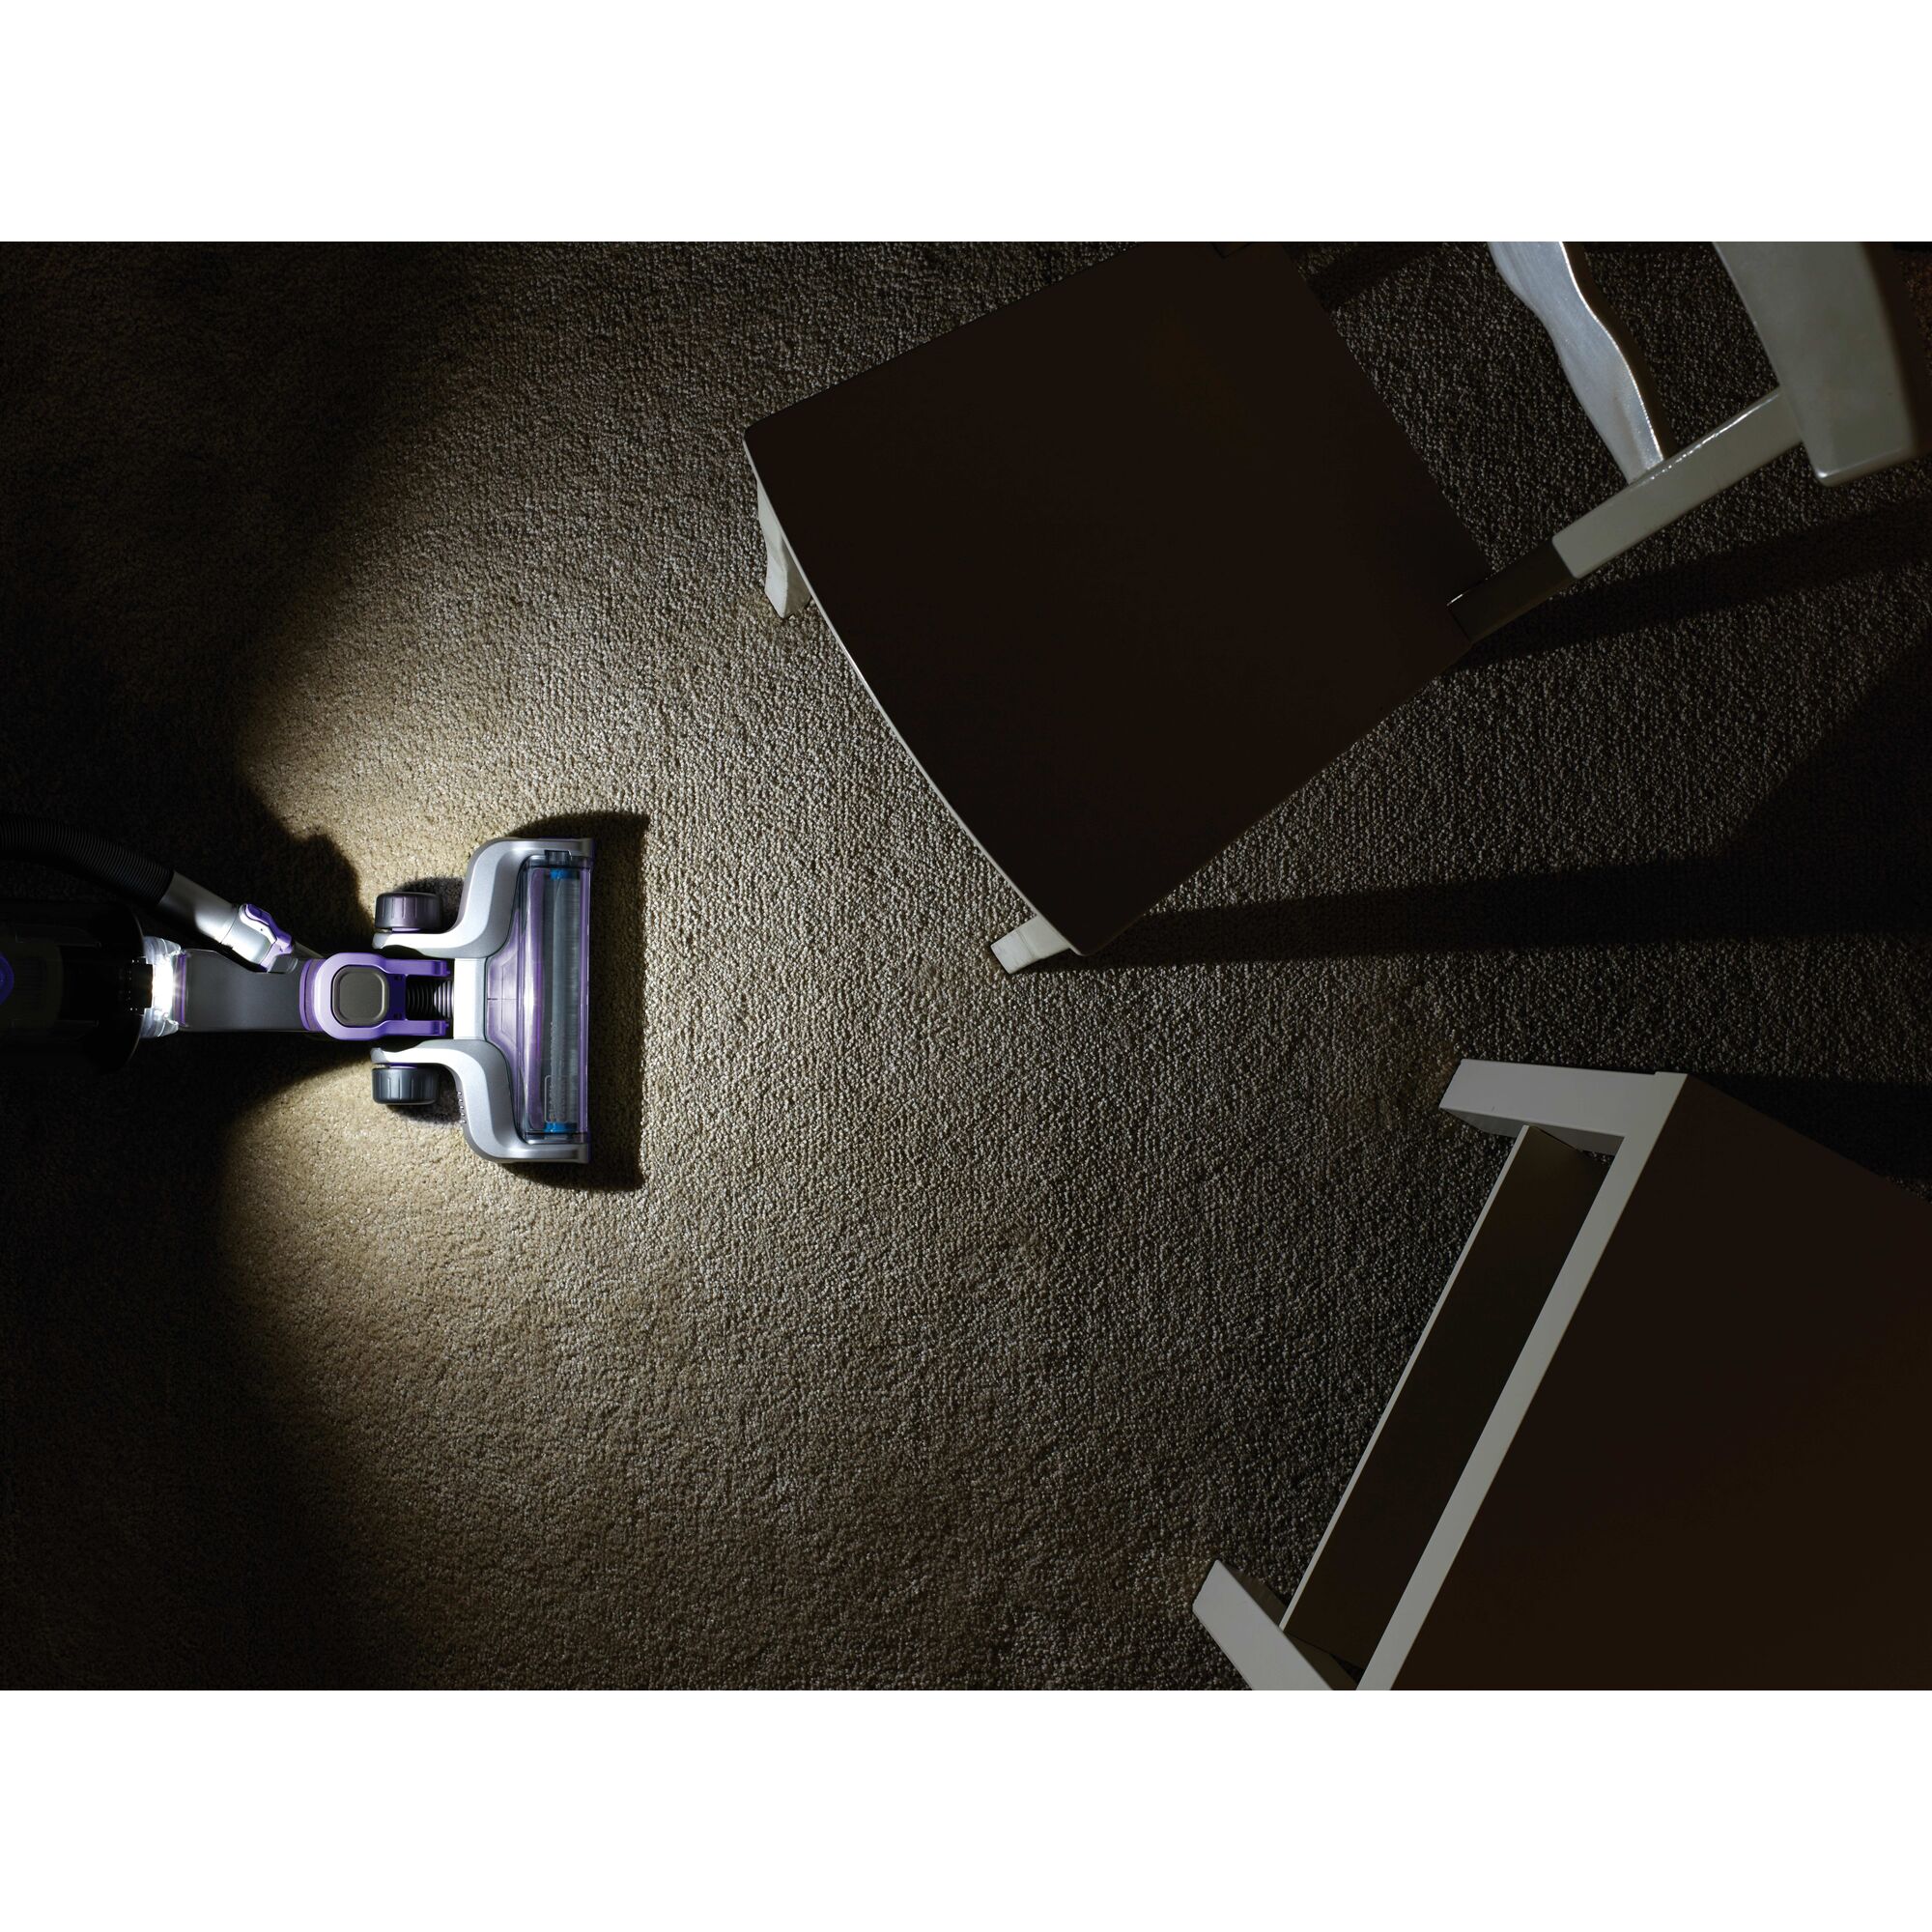 POWER SERIES PRO Cordless 2 in 1 Pet Vacuum being used for cleaning in dark using L E D light.